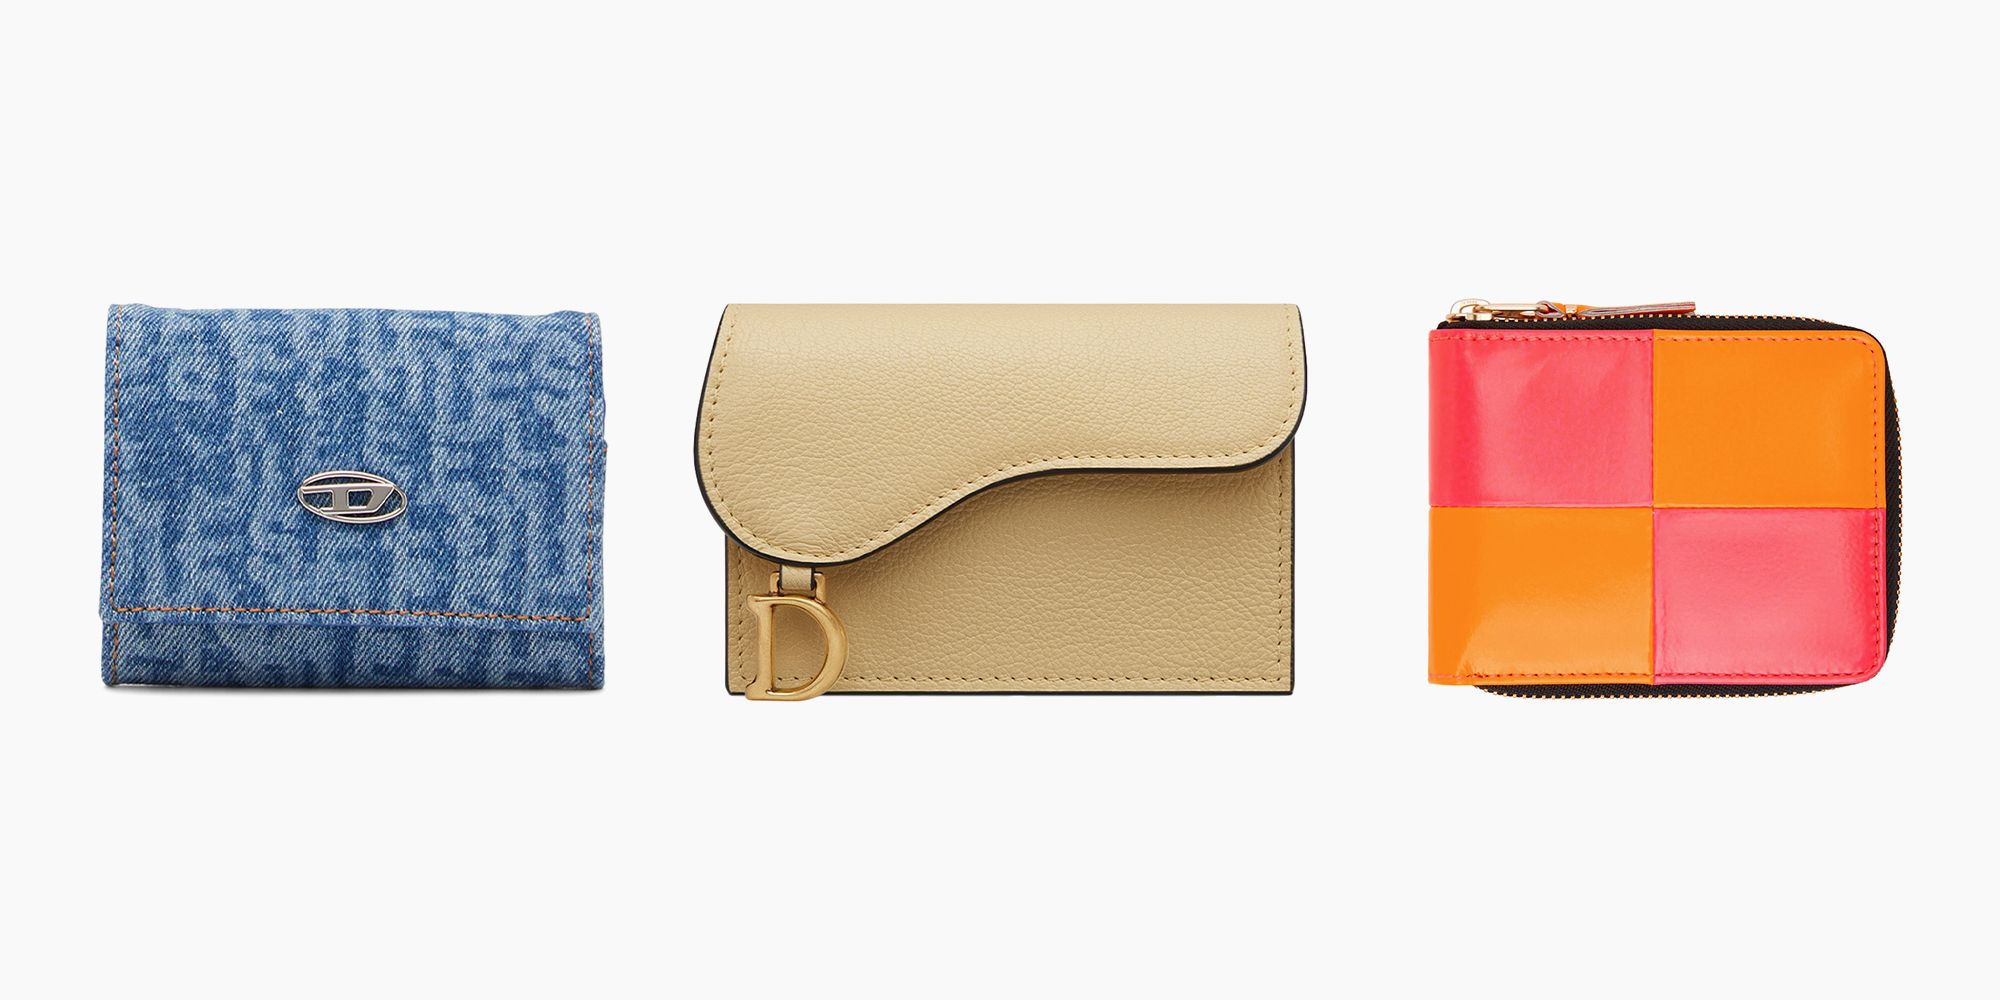 18 Women's Wallets That Are Stylish Enough to Be Seen